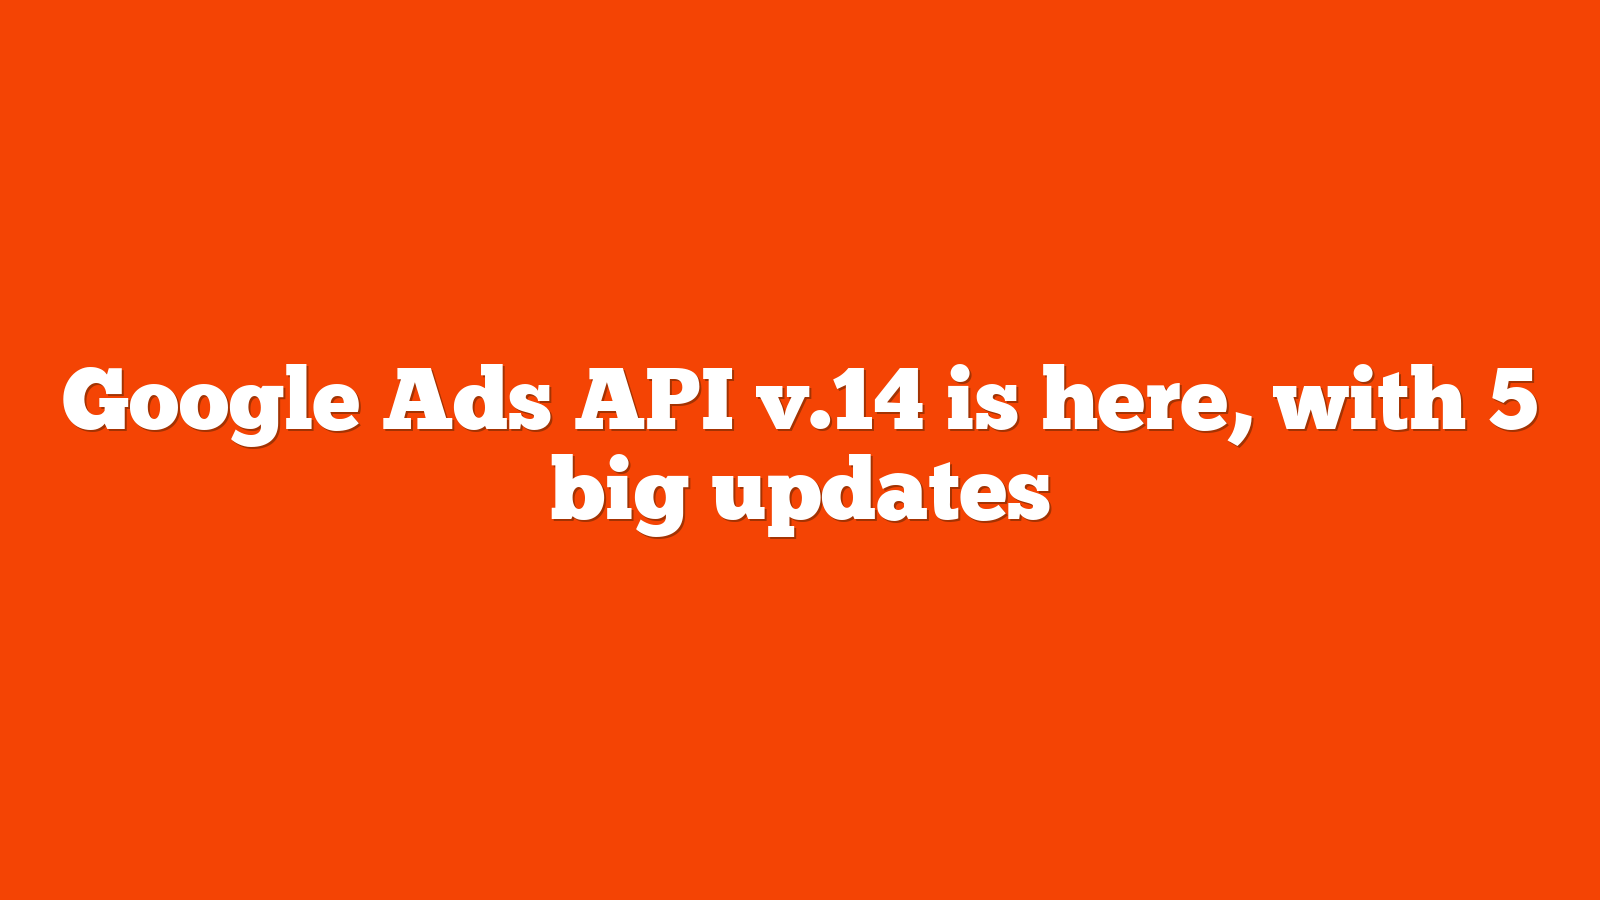 Google Ads API v14 is here with 5 big updates